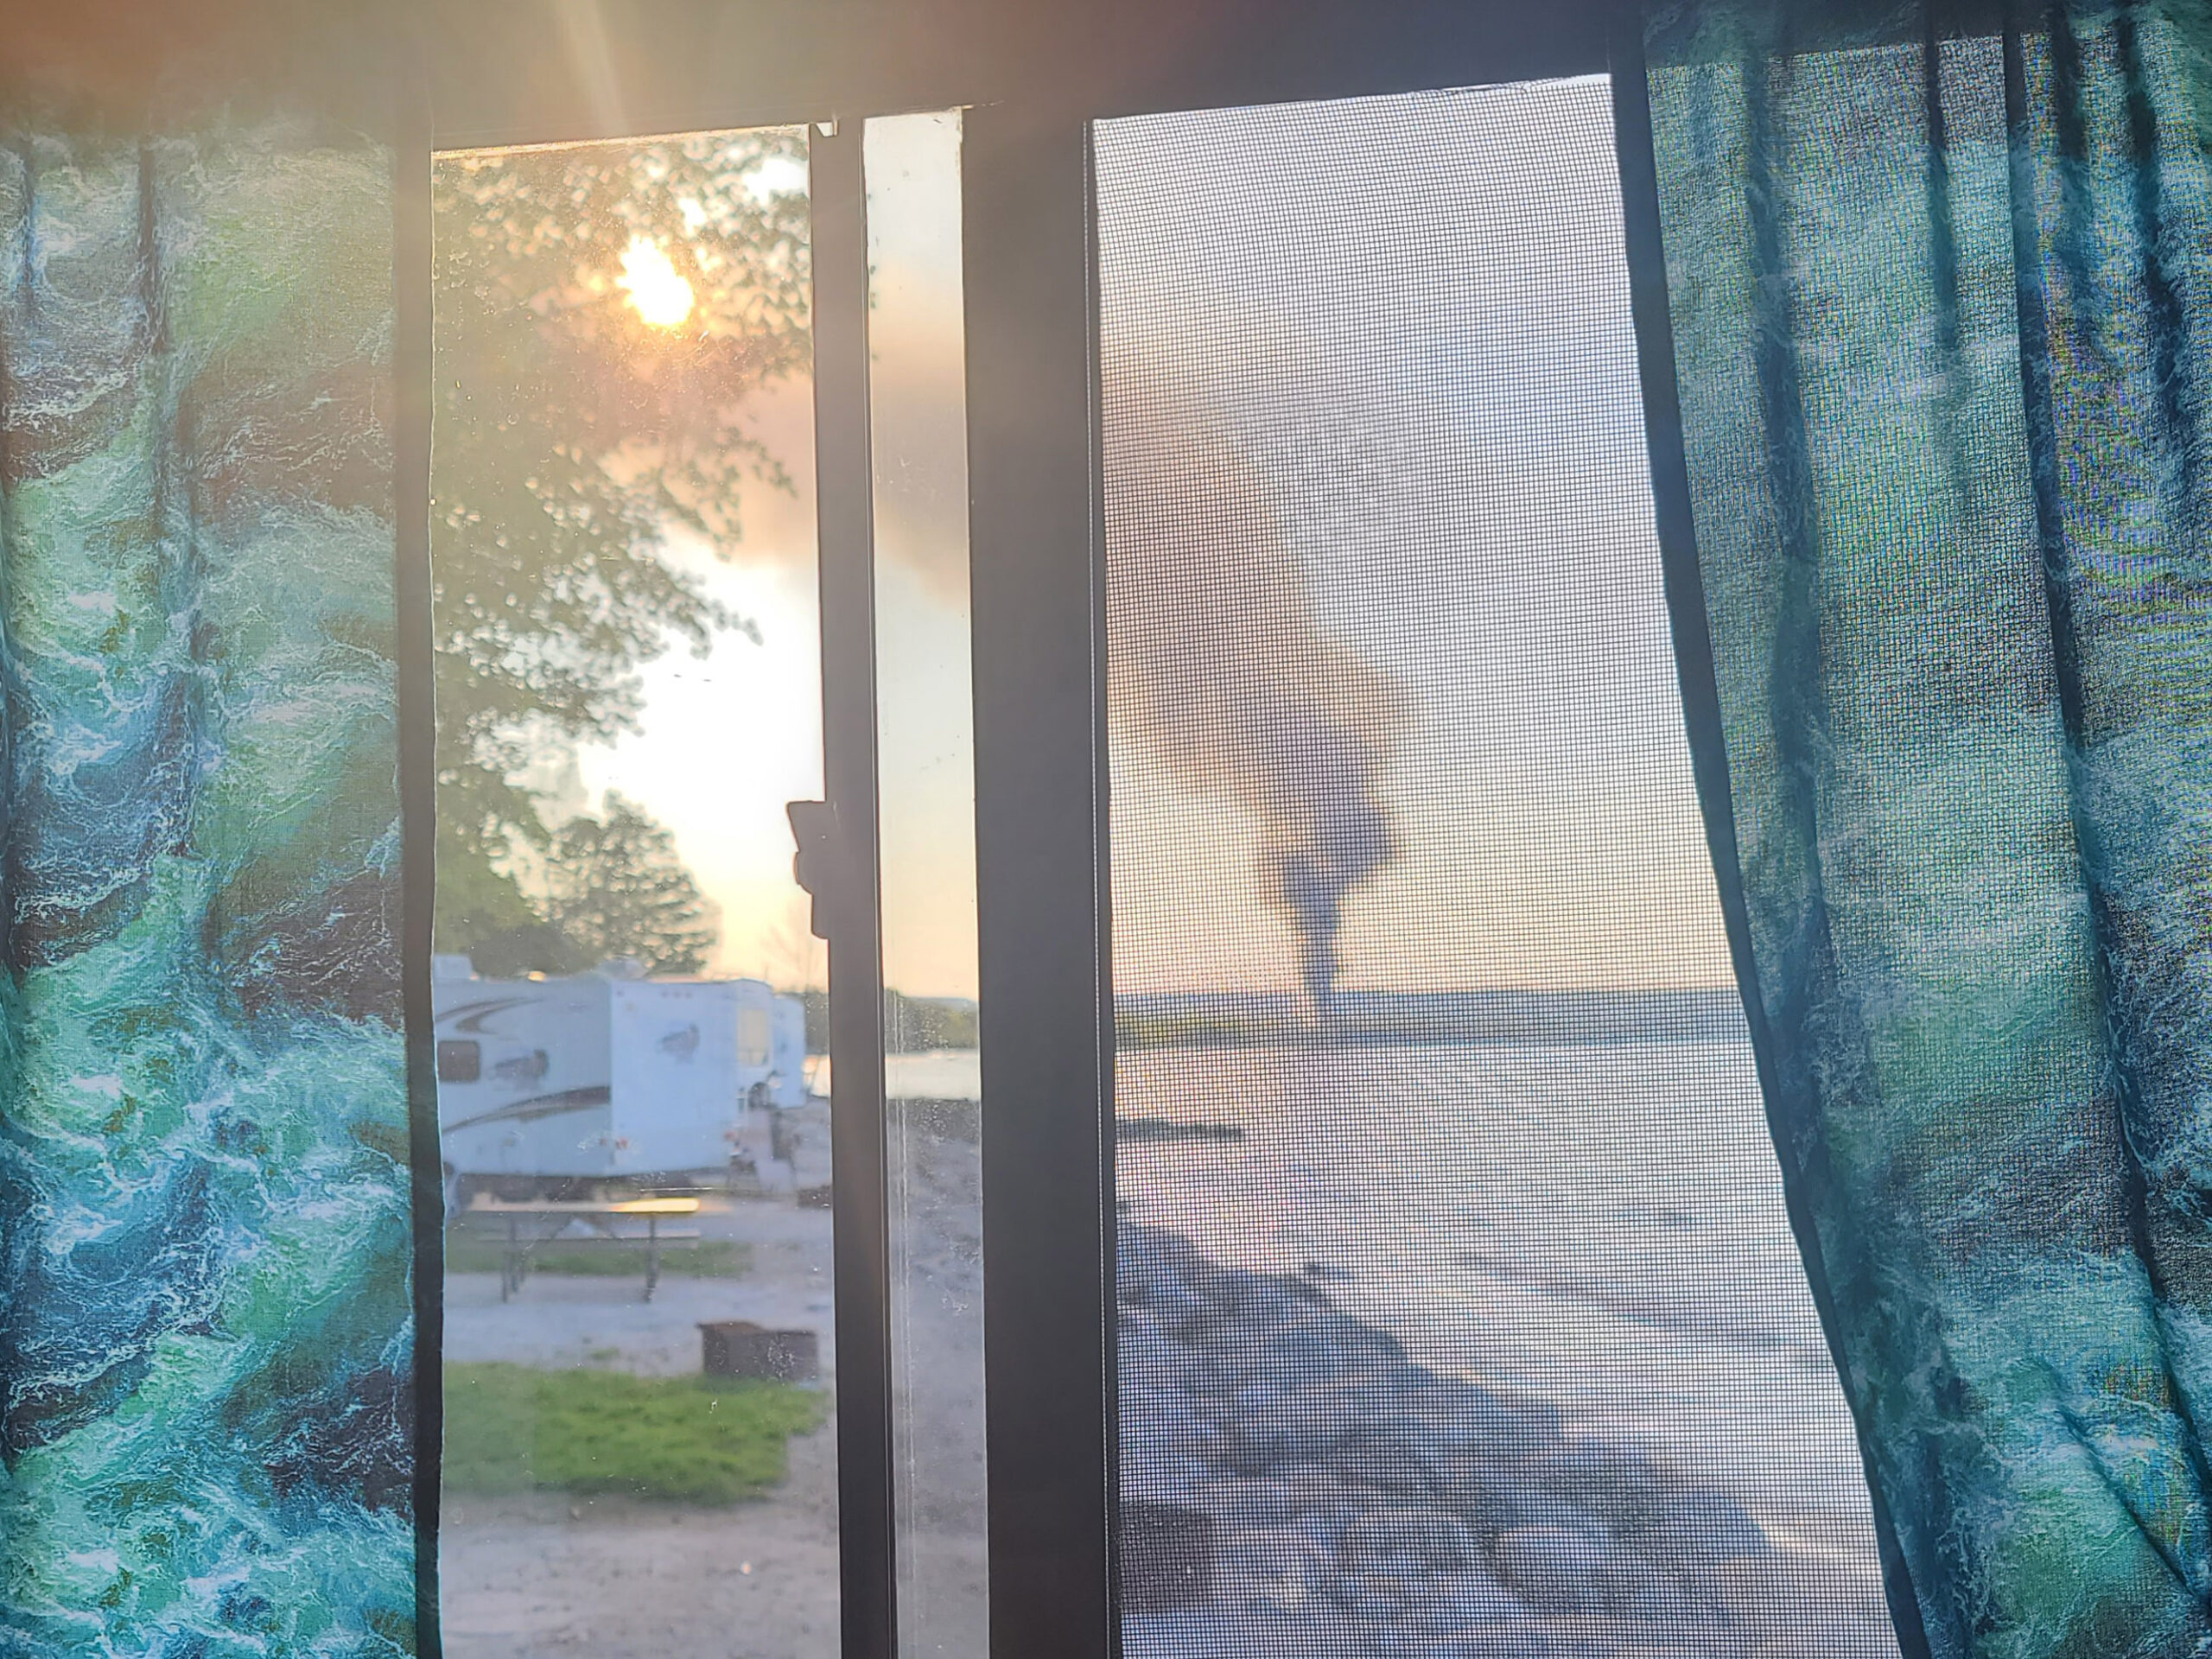 A view of a smoking fire in the distance, across the bay, taken from within an RV camper.